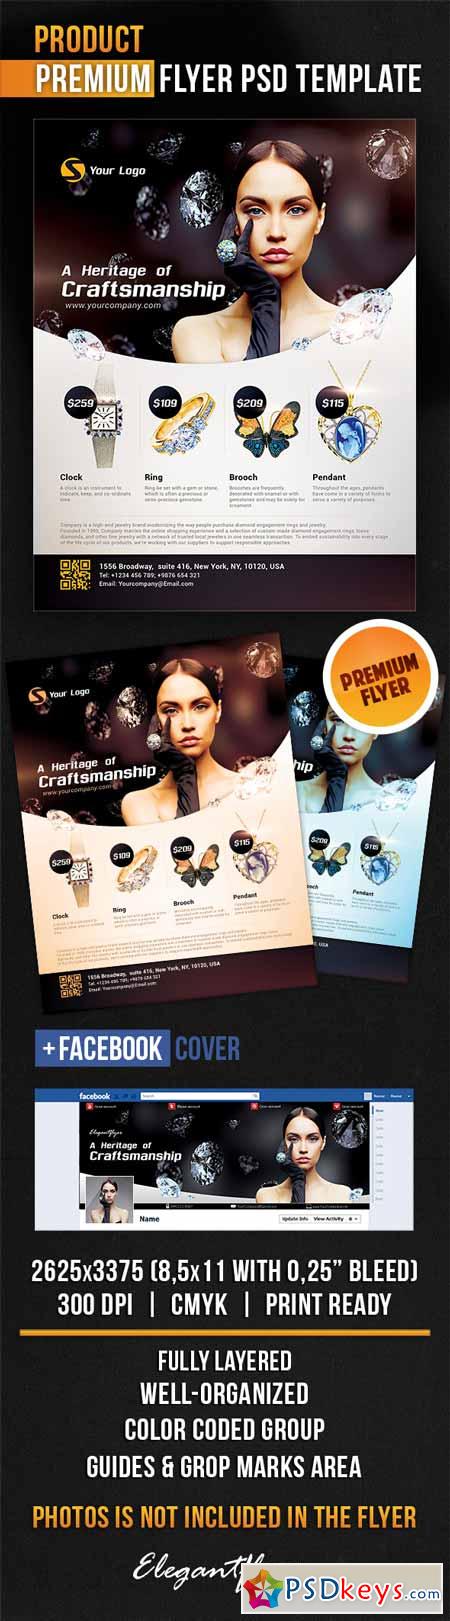 Product – Flyer PSD Template + Facebook Cover